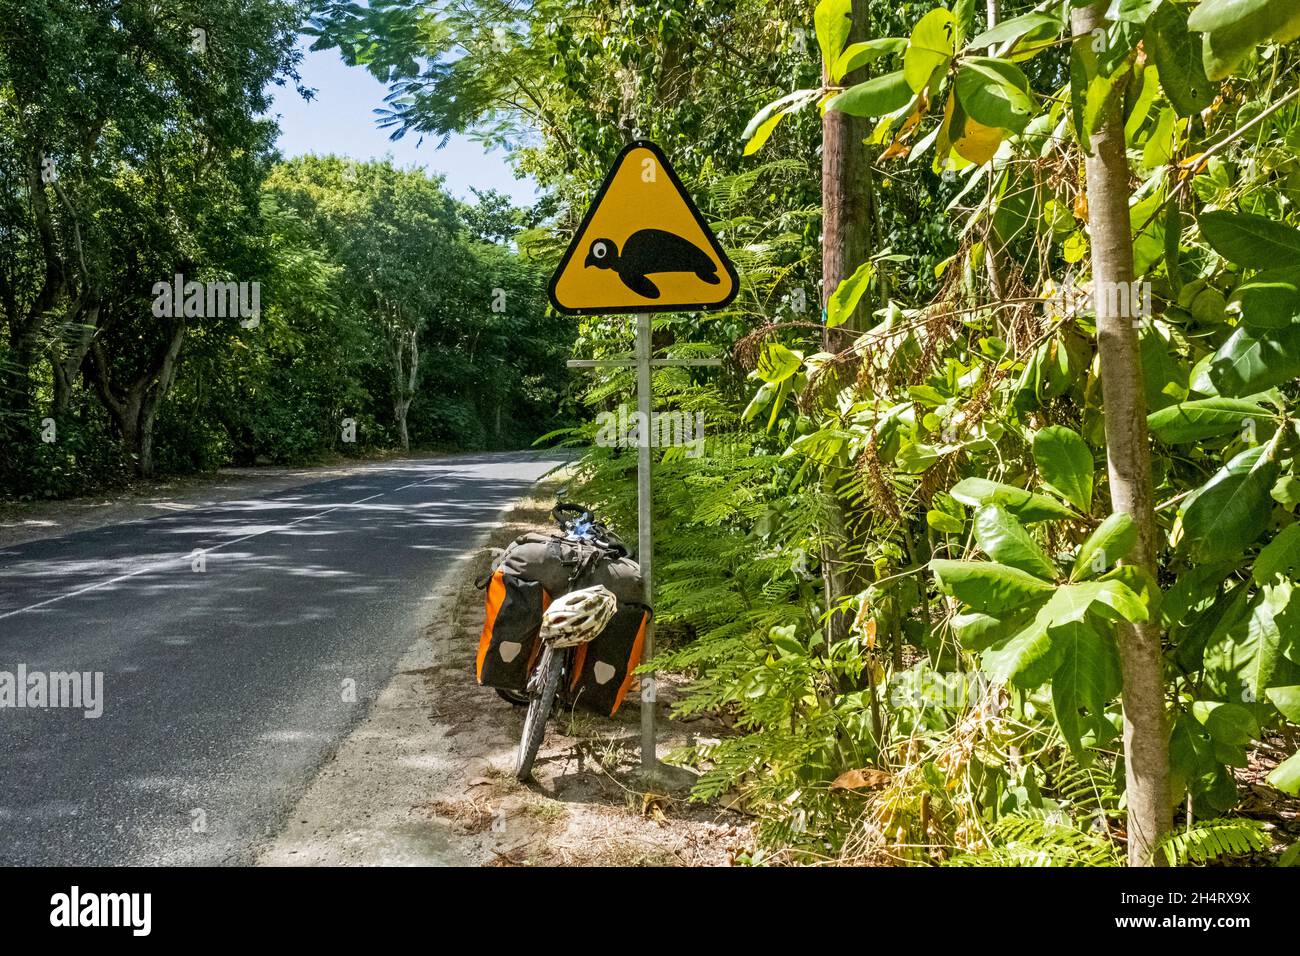 Touring bicycle and warning sign for turtles crossing the road on Basse-Terre Island, archipelago of Guadeloupe, Lesser Antilles in the Caribbean Sea Stock Photo